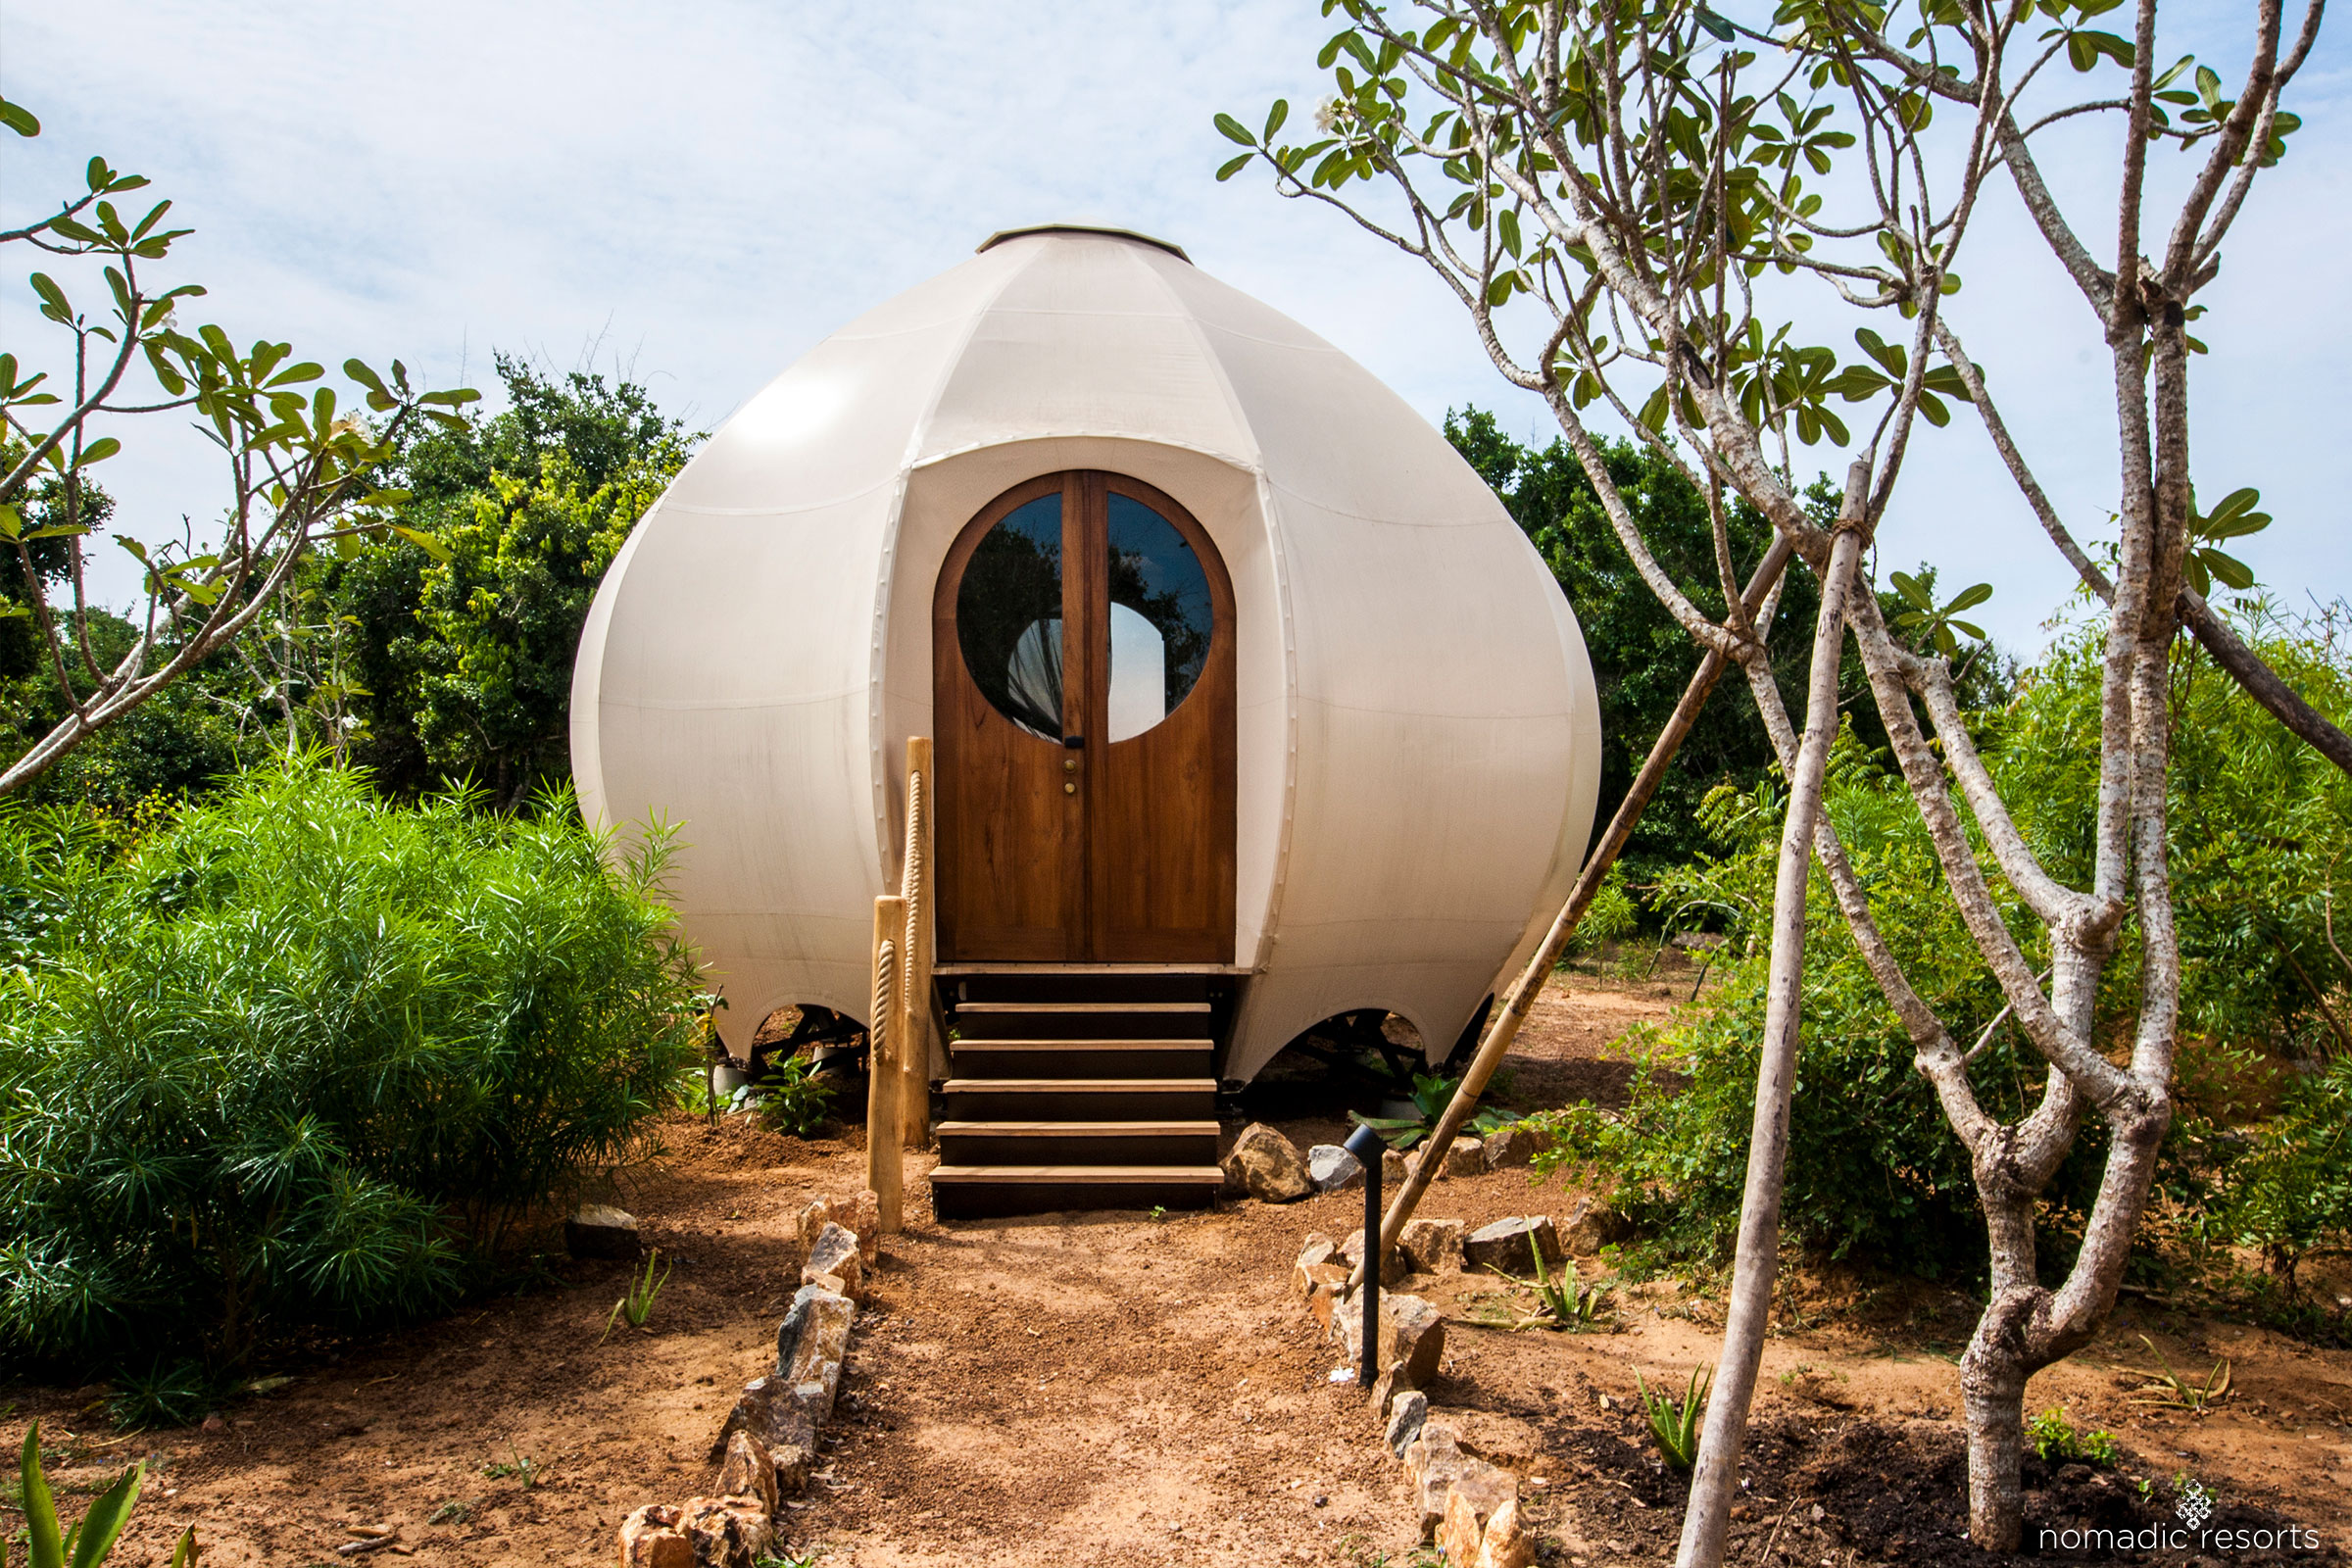 The Urchin, the second pod designed by Nomadic Resorts.